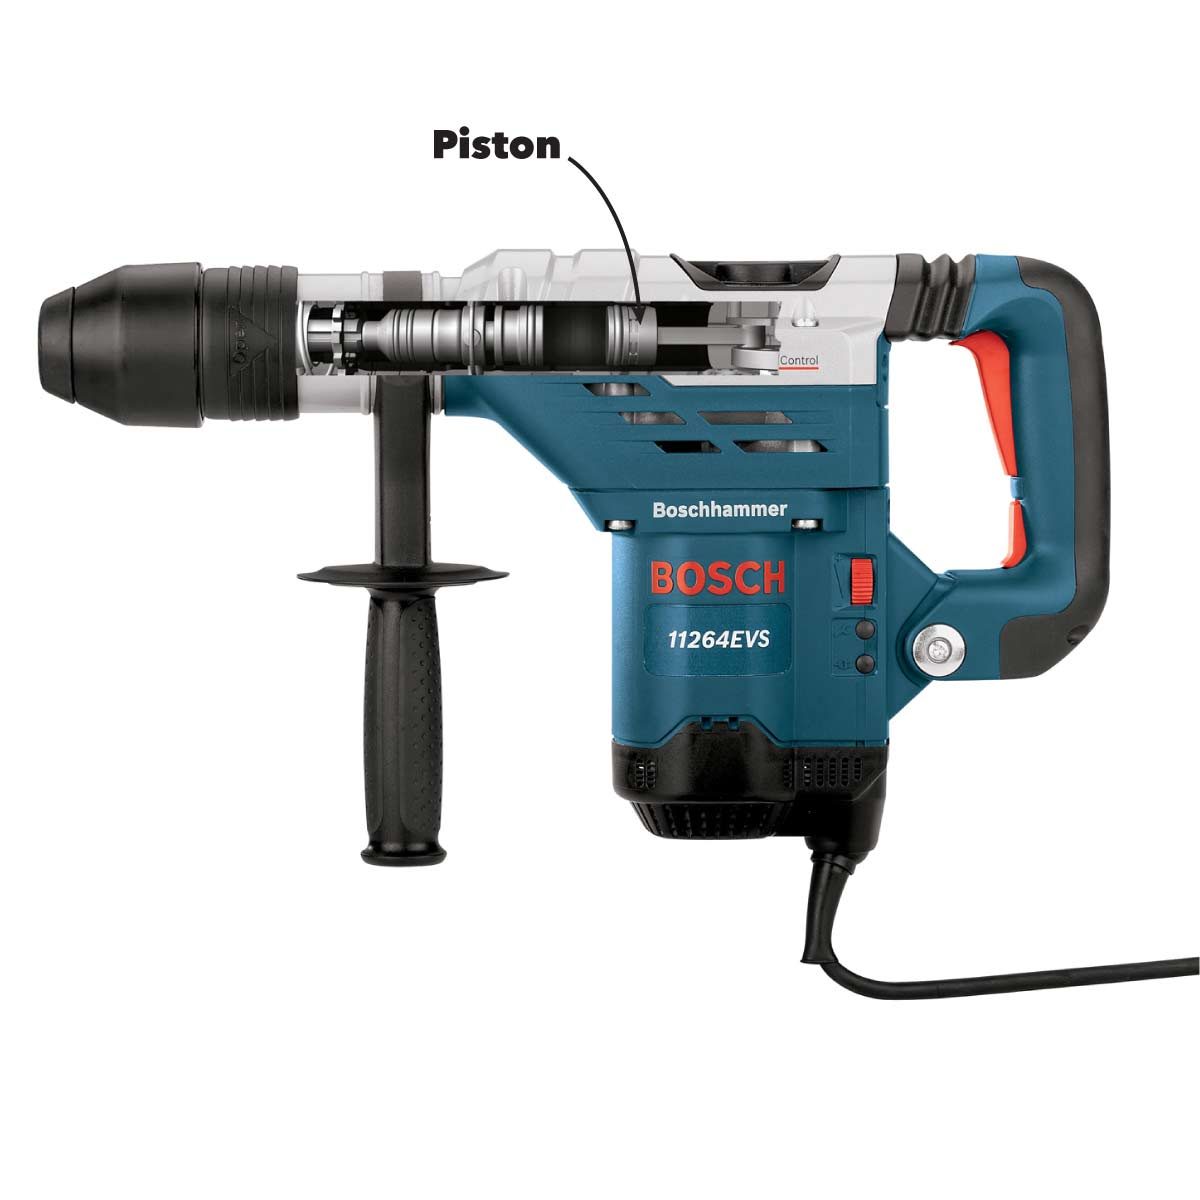 Rotary Hammer Drill Use on Sale, 57% OFF | www.propellermadrid.com